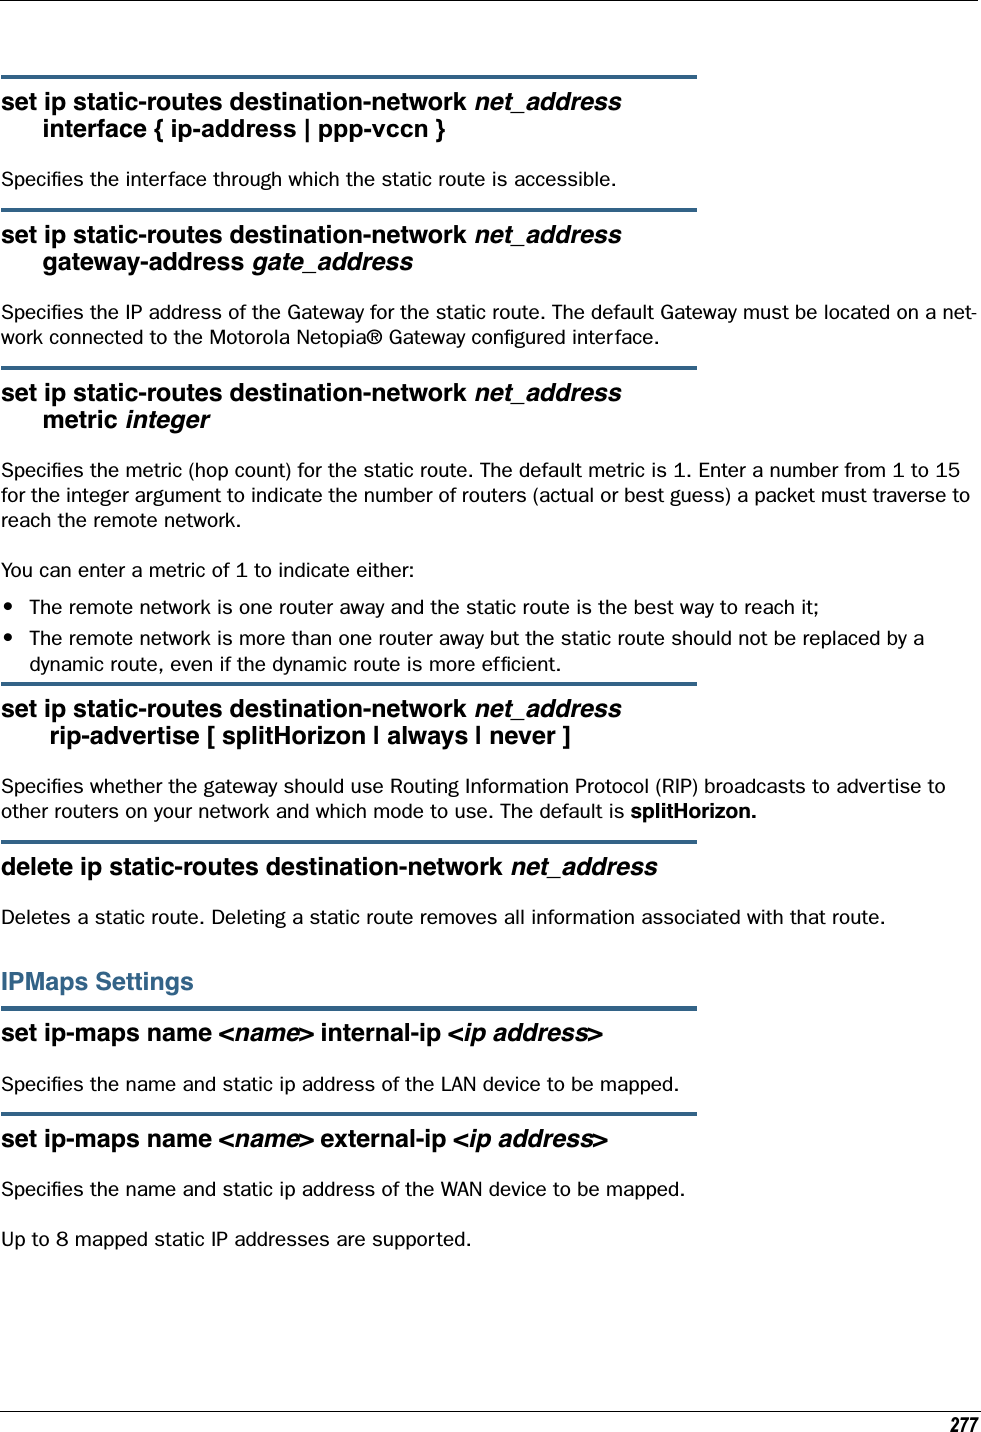 277set ip static-routes destination-network net_address      interface { ip-address | ppp-vccn }Speciﬁes the interface through which the static route is accessible.set ip static-routes destination-network net_address      gateway-address gate_addressSpeciﬁes the IP address of the Gateway for the static route. The default Gateway must be located on a net-work connected to the Motorola Netopia® Gateway conﬁgured interface.set ip static-routes destination-network net_address      metric integerSpeciﬁes the metric (hop count) for the static route. The default metric is 1. Enter a number from 1 to 15 for the integer argument to indicate the number of routers (actual or best guess) a packet must traverse to reach the remote network.You can enter a metric of 1 to indicate either:•The remote network is one router away and the static route is the best way to reach it;•The remote network is more than one router away but the static route should not be replaced by a dynamic route, even if the dynamic route is more efﬁcient. set ip static-routes destination-network net_address       rip-advertise [ splitHorizon | always | never ]Speciﬁes whether the gateway should use Routing Information Protocol (RIP) broadcasts to advertise to other routers on your network and which mode to use. The default is splitHorizon.delete ip static-routes destination-network net_addressDeletes a static route. Deleting a static route removes all information associated with that route.IPMaps Settingsset ip-maps name &lt;name&gt; internal-ip &lt;ip address&gt;Speciﬁes the name and static ip address of the LAN device to be mapped.set ip-maps name &lt;name&gt; external-ip &lt;ip address&gt;Speciﬁes the name and static ip address of the WAN device to be mapped.Up to 8 mapped static IP addresses are supported.